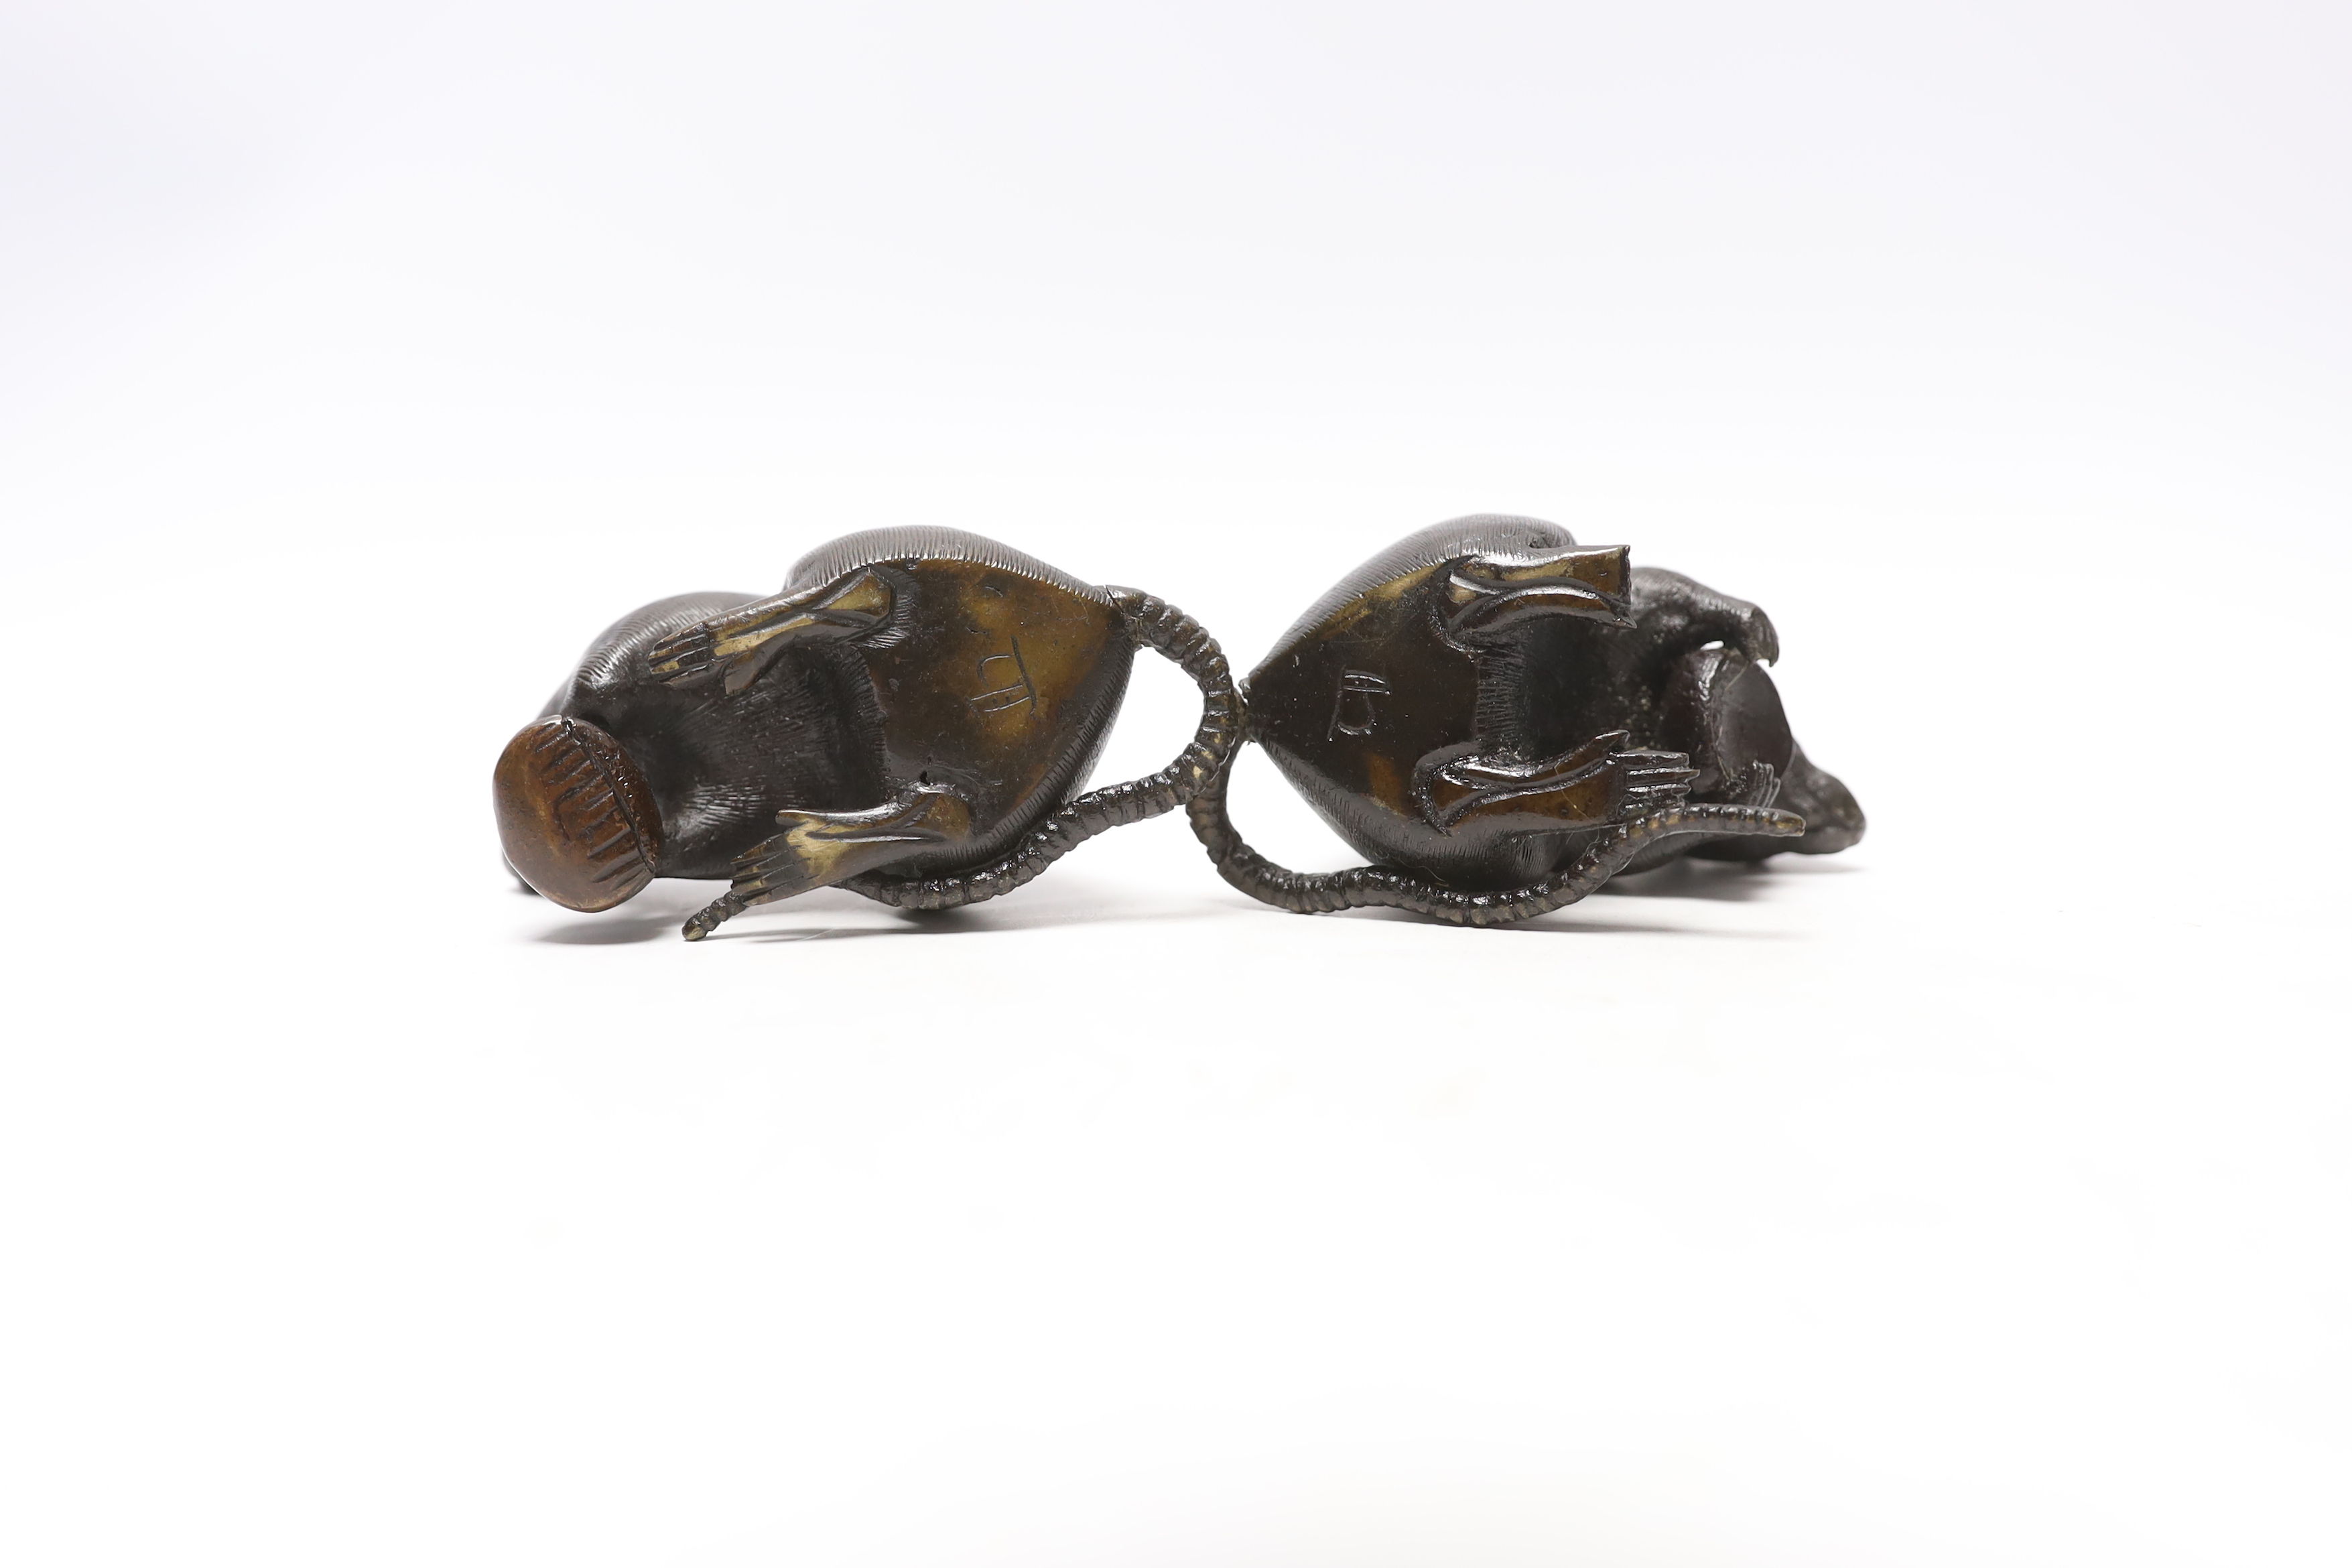 Two Japanese Meiji period cast bronze models of mice, signed, tallest 6.5cm